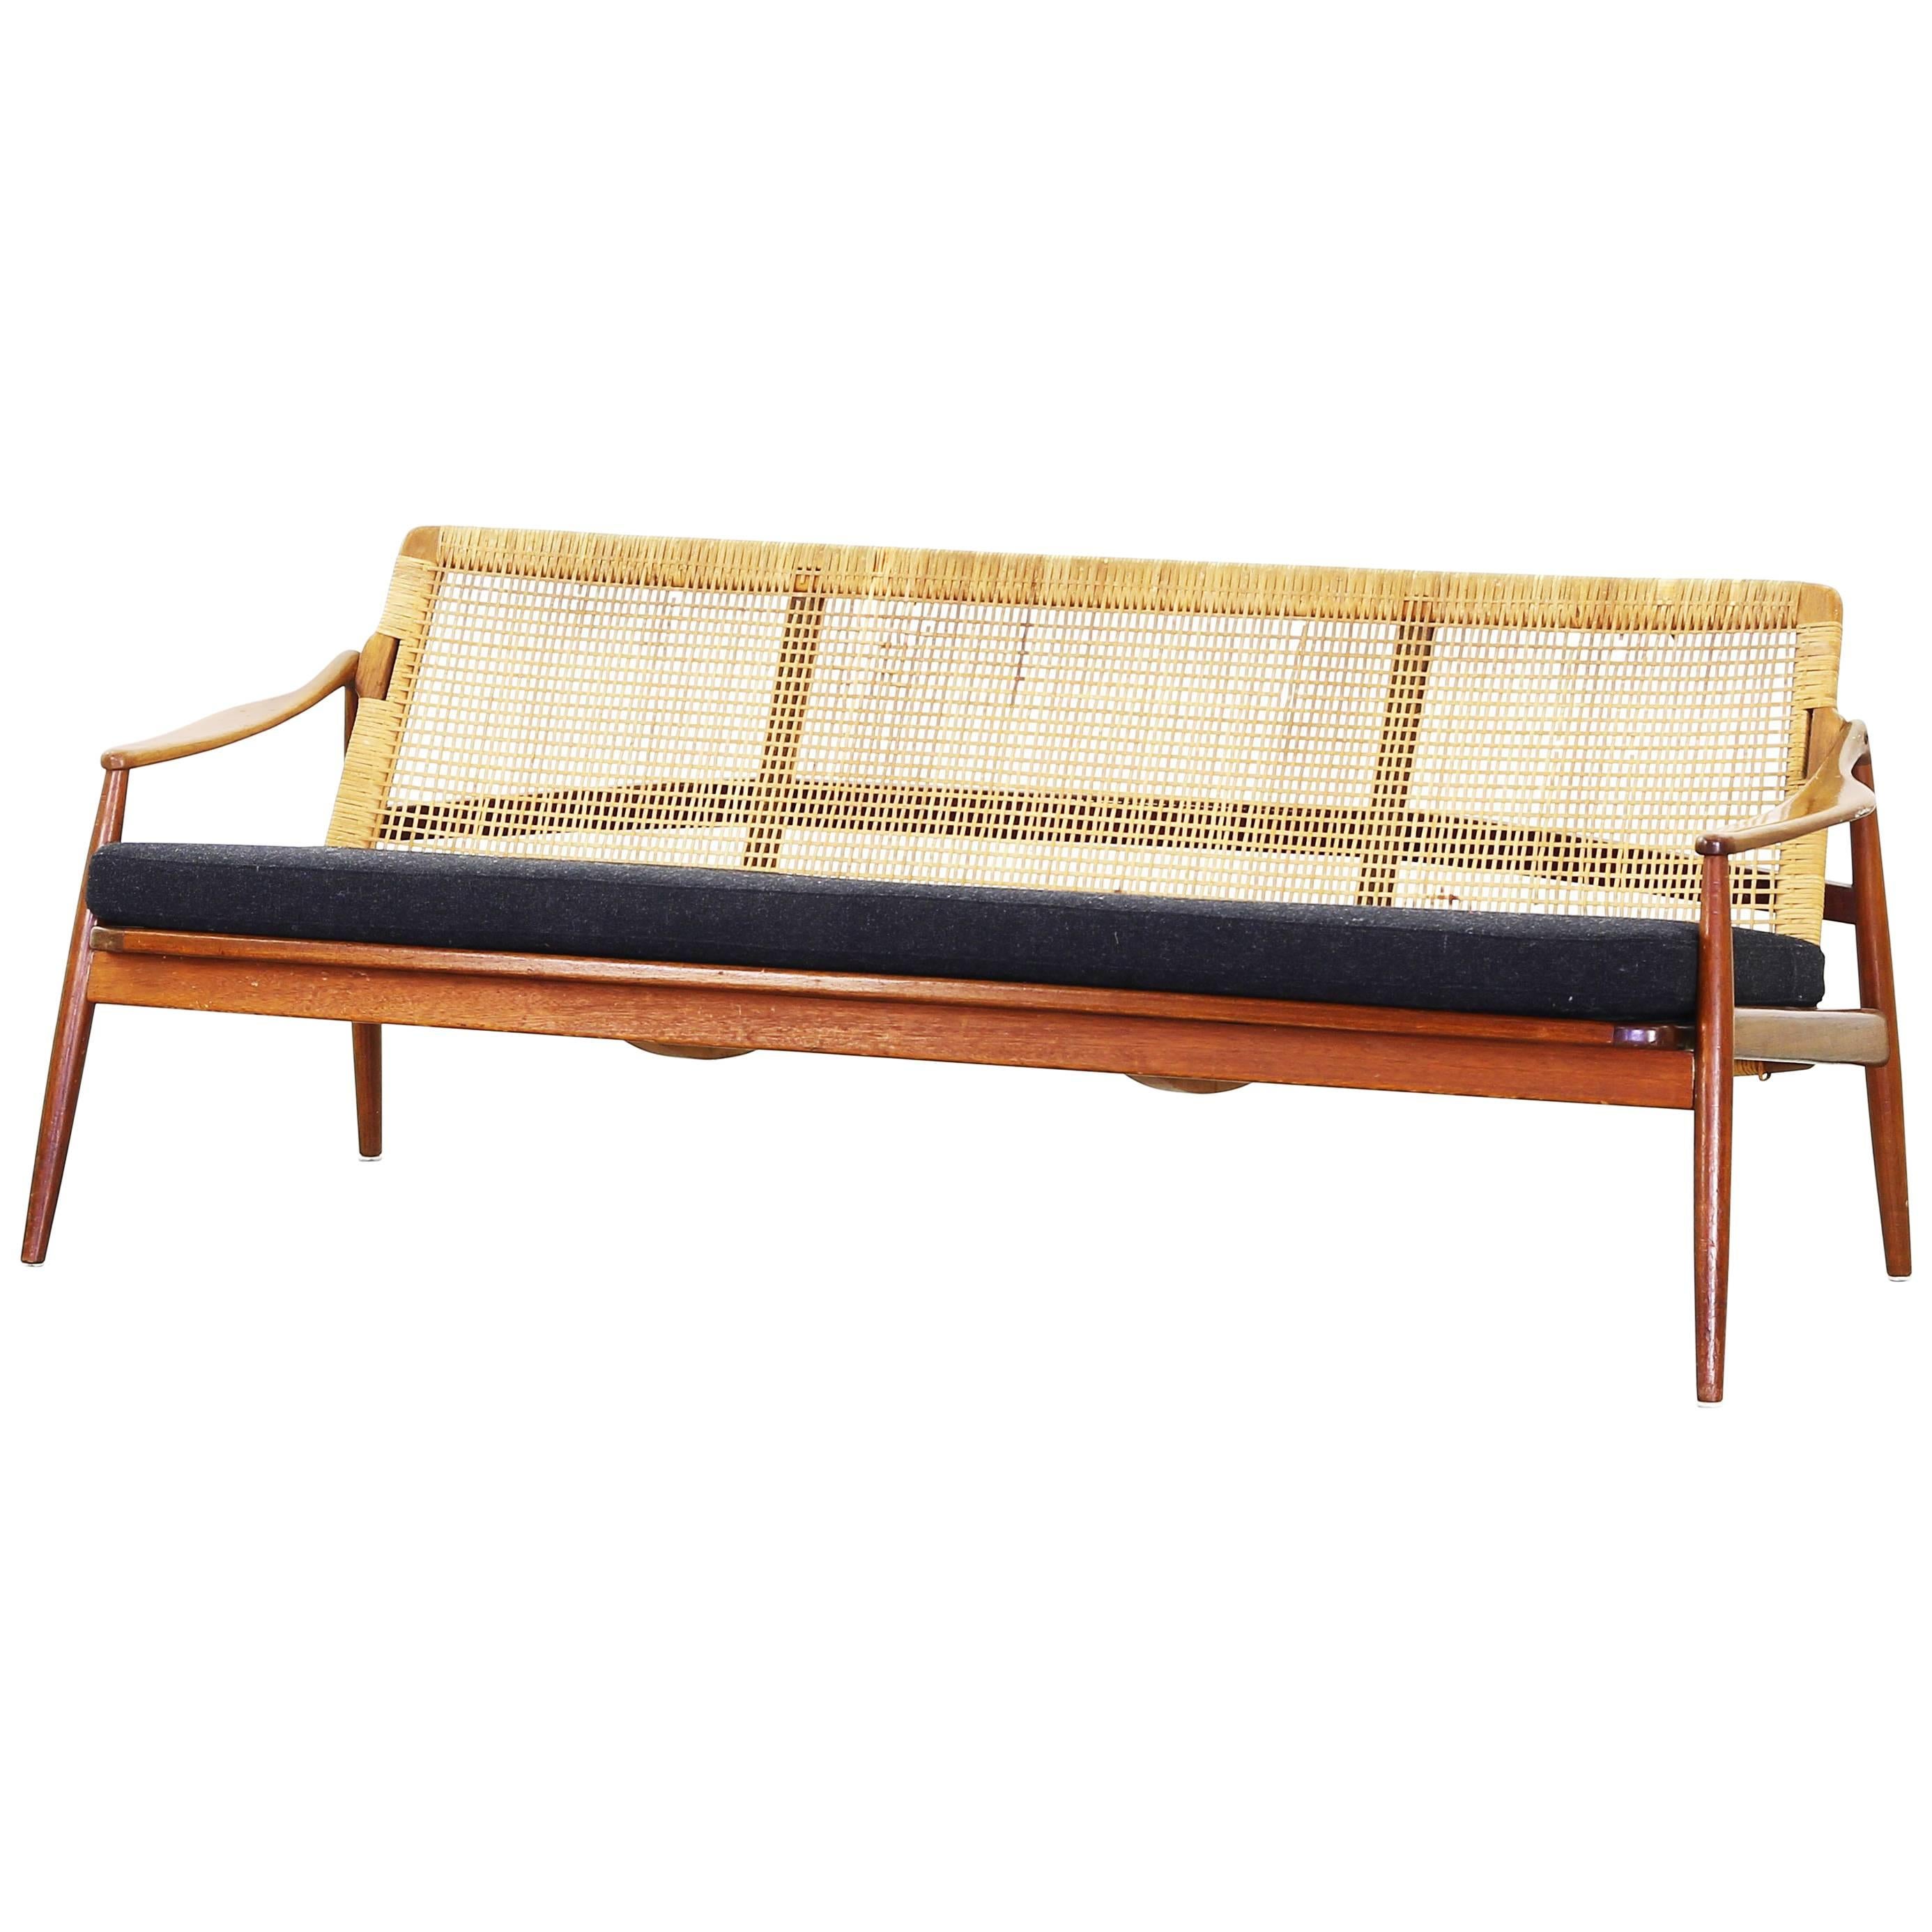 Beautiful Sofa Made of Teak by Hartmut Lohmeyer for Wilkhahn, 1950s, Germany For Sale